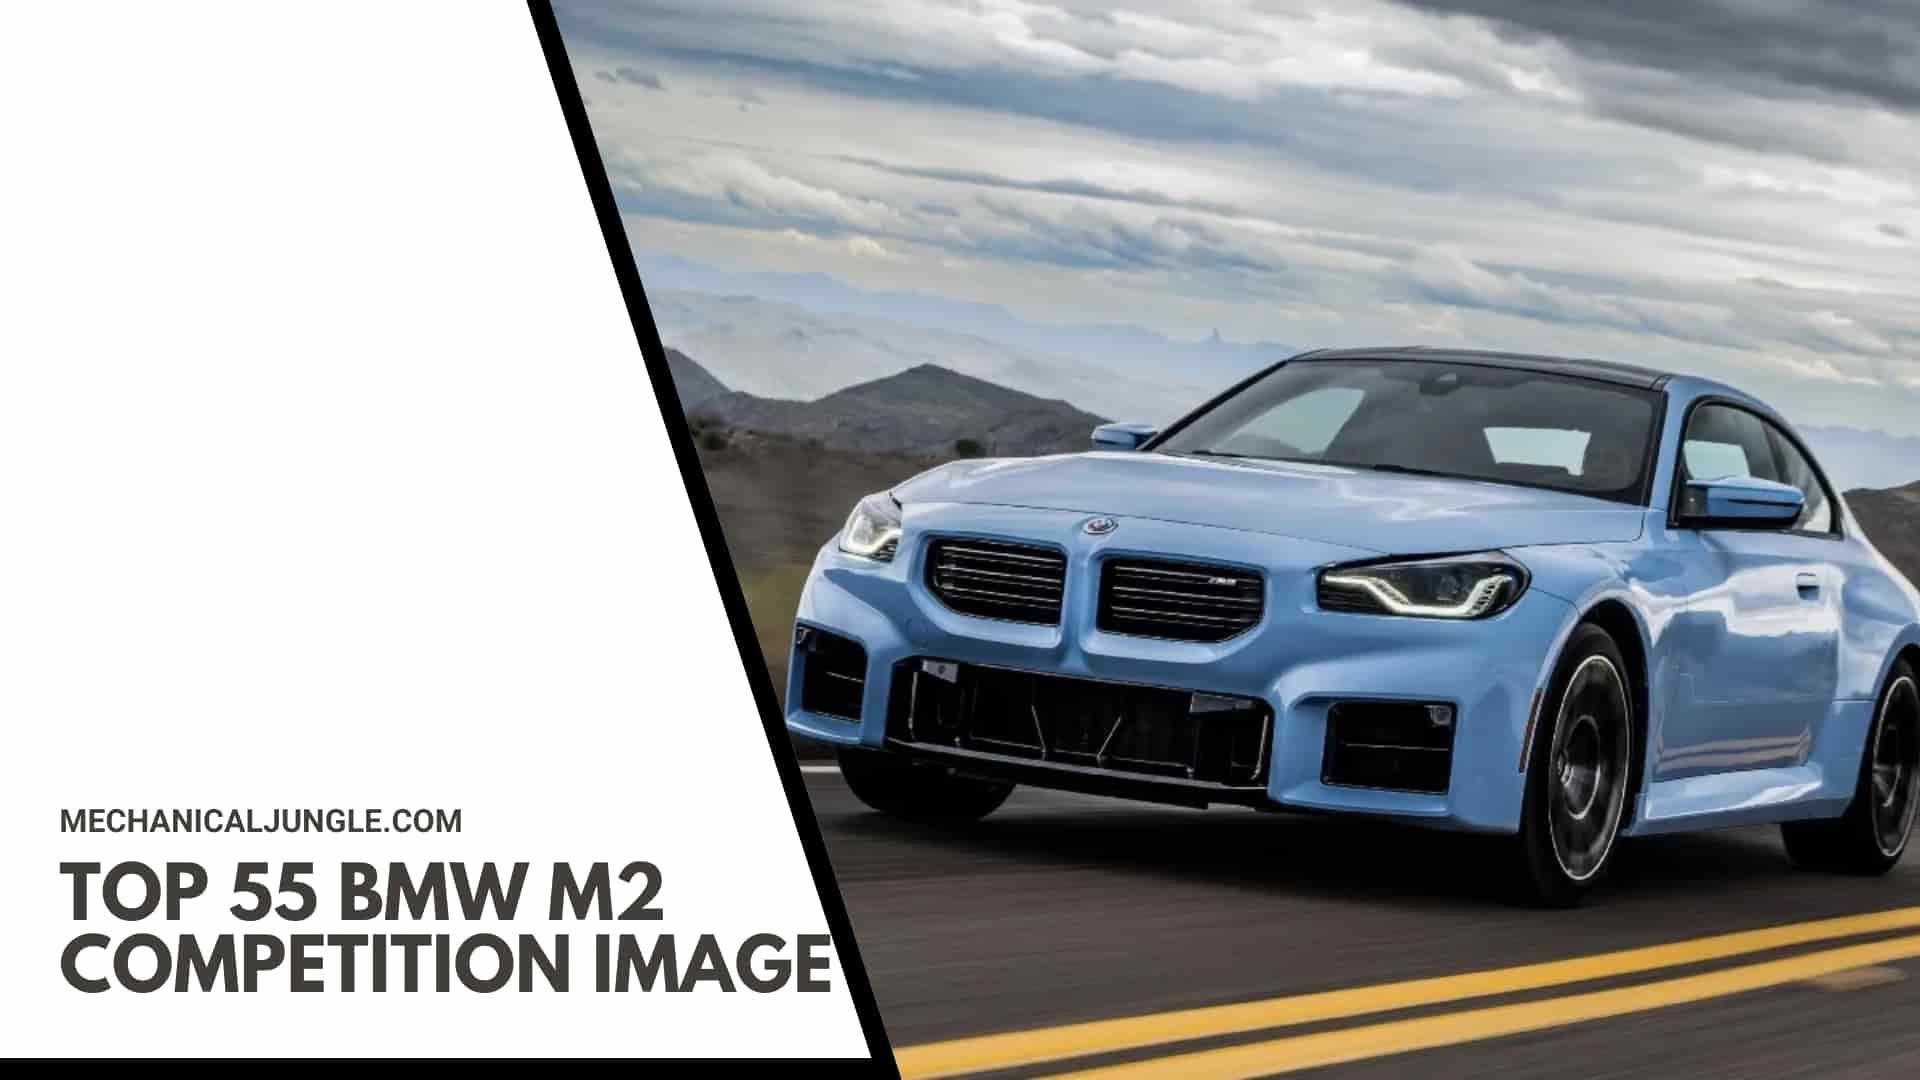 Top 55 BMW M2 Competition Image